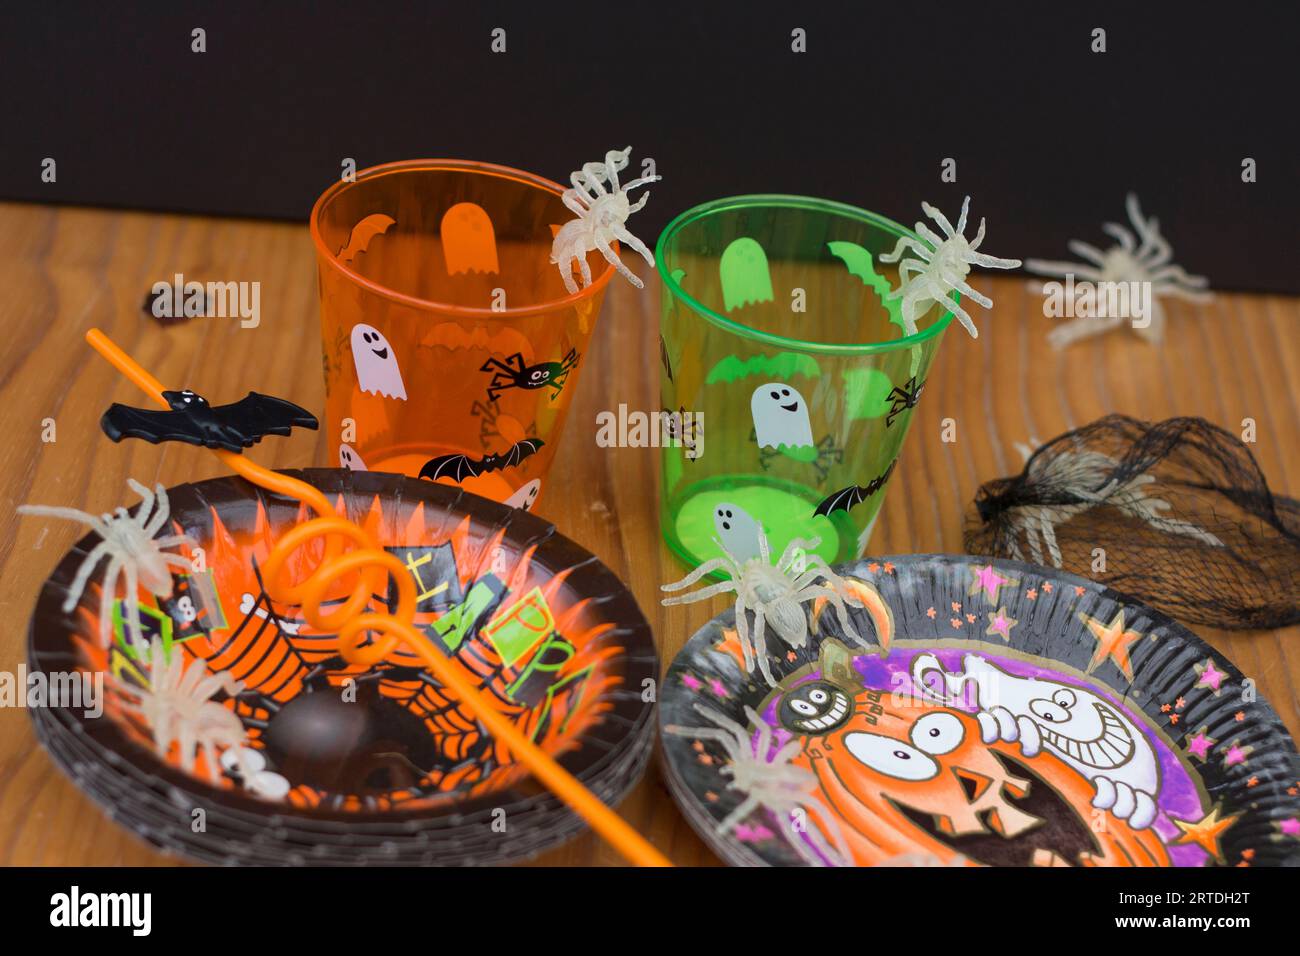 Spiders gathering at halloween theme party on table at night Stock Photo